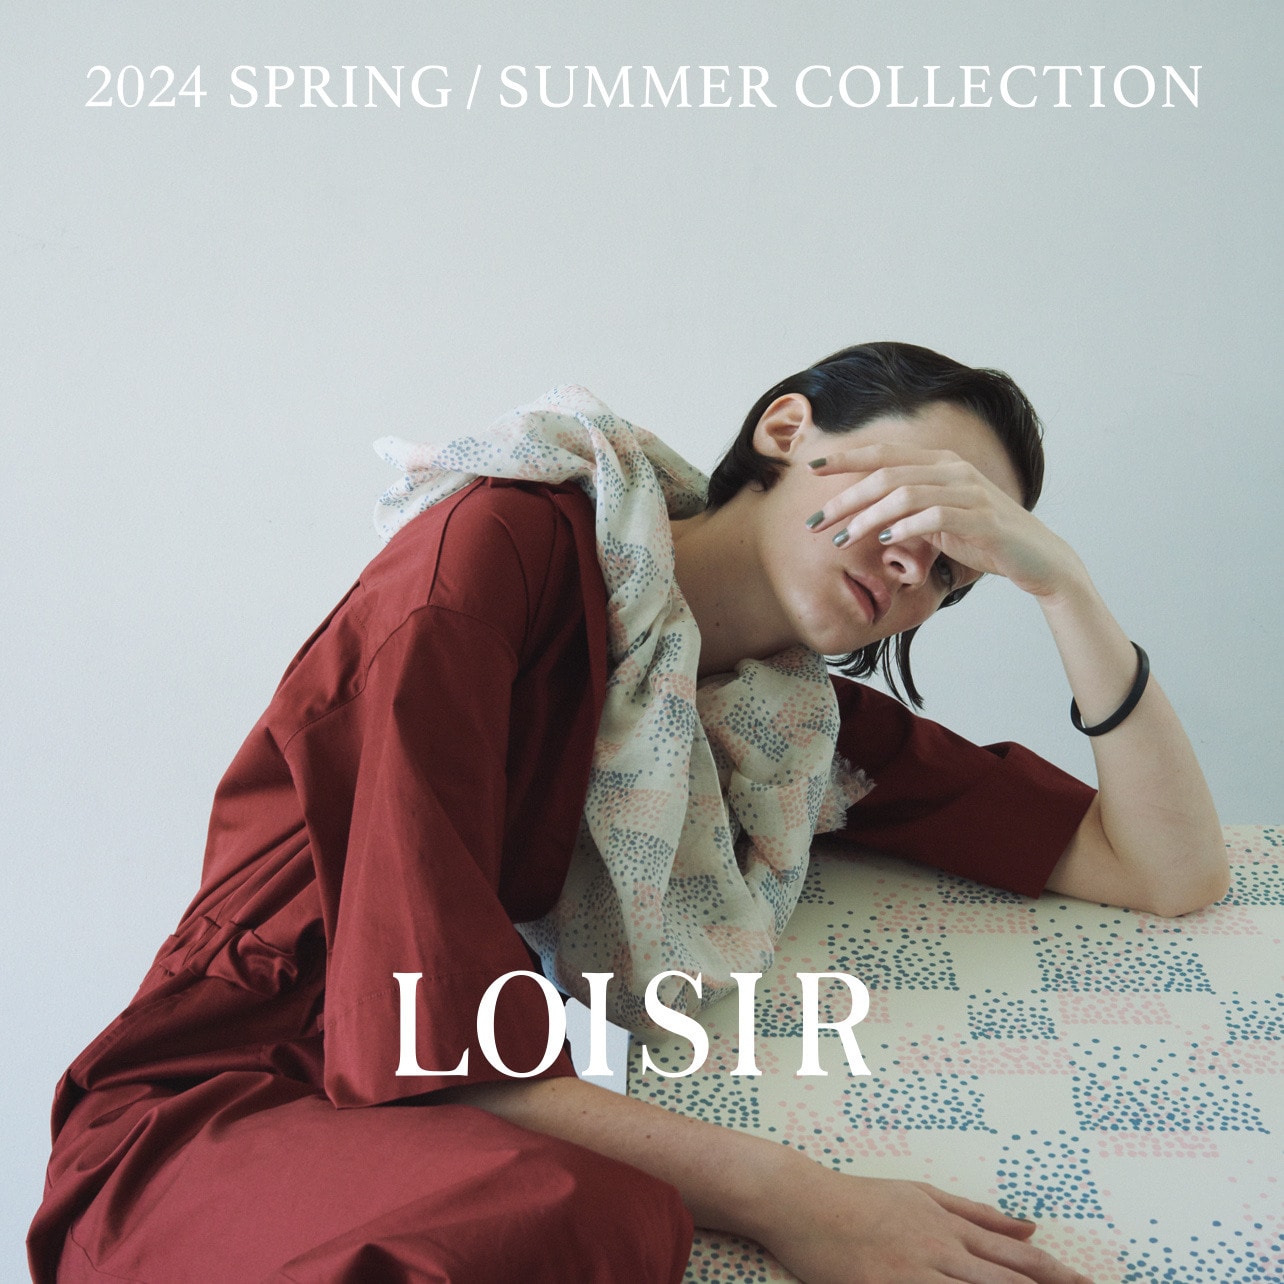 LOISIR 24SS Collection